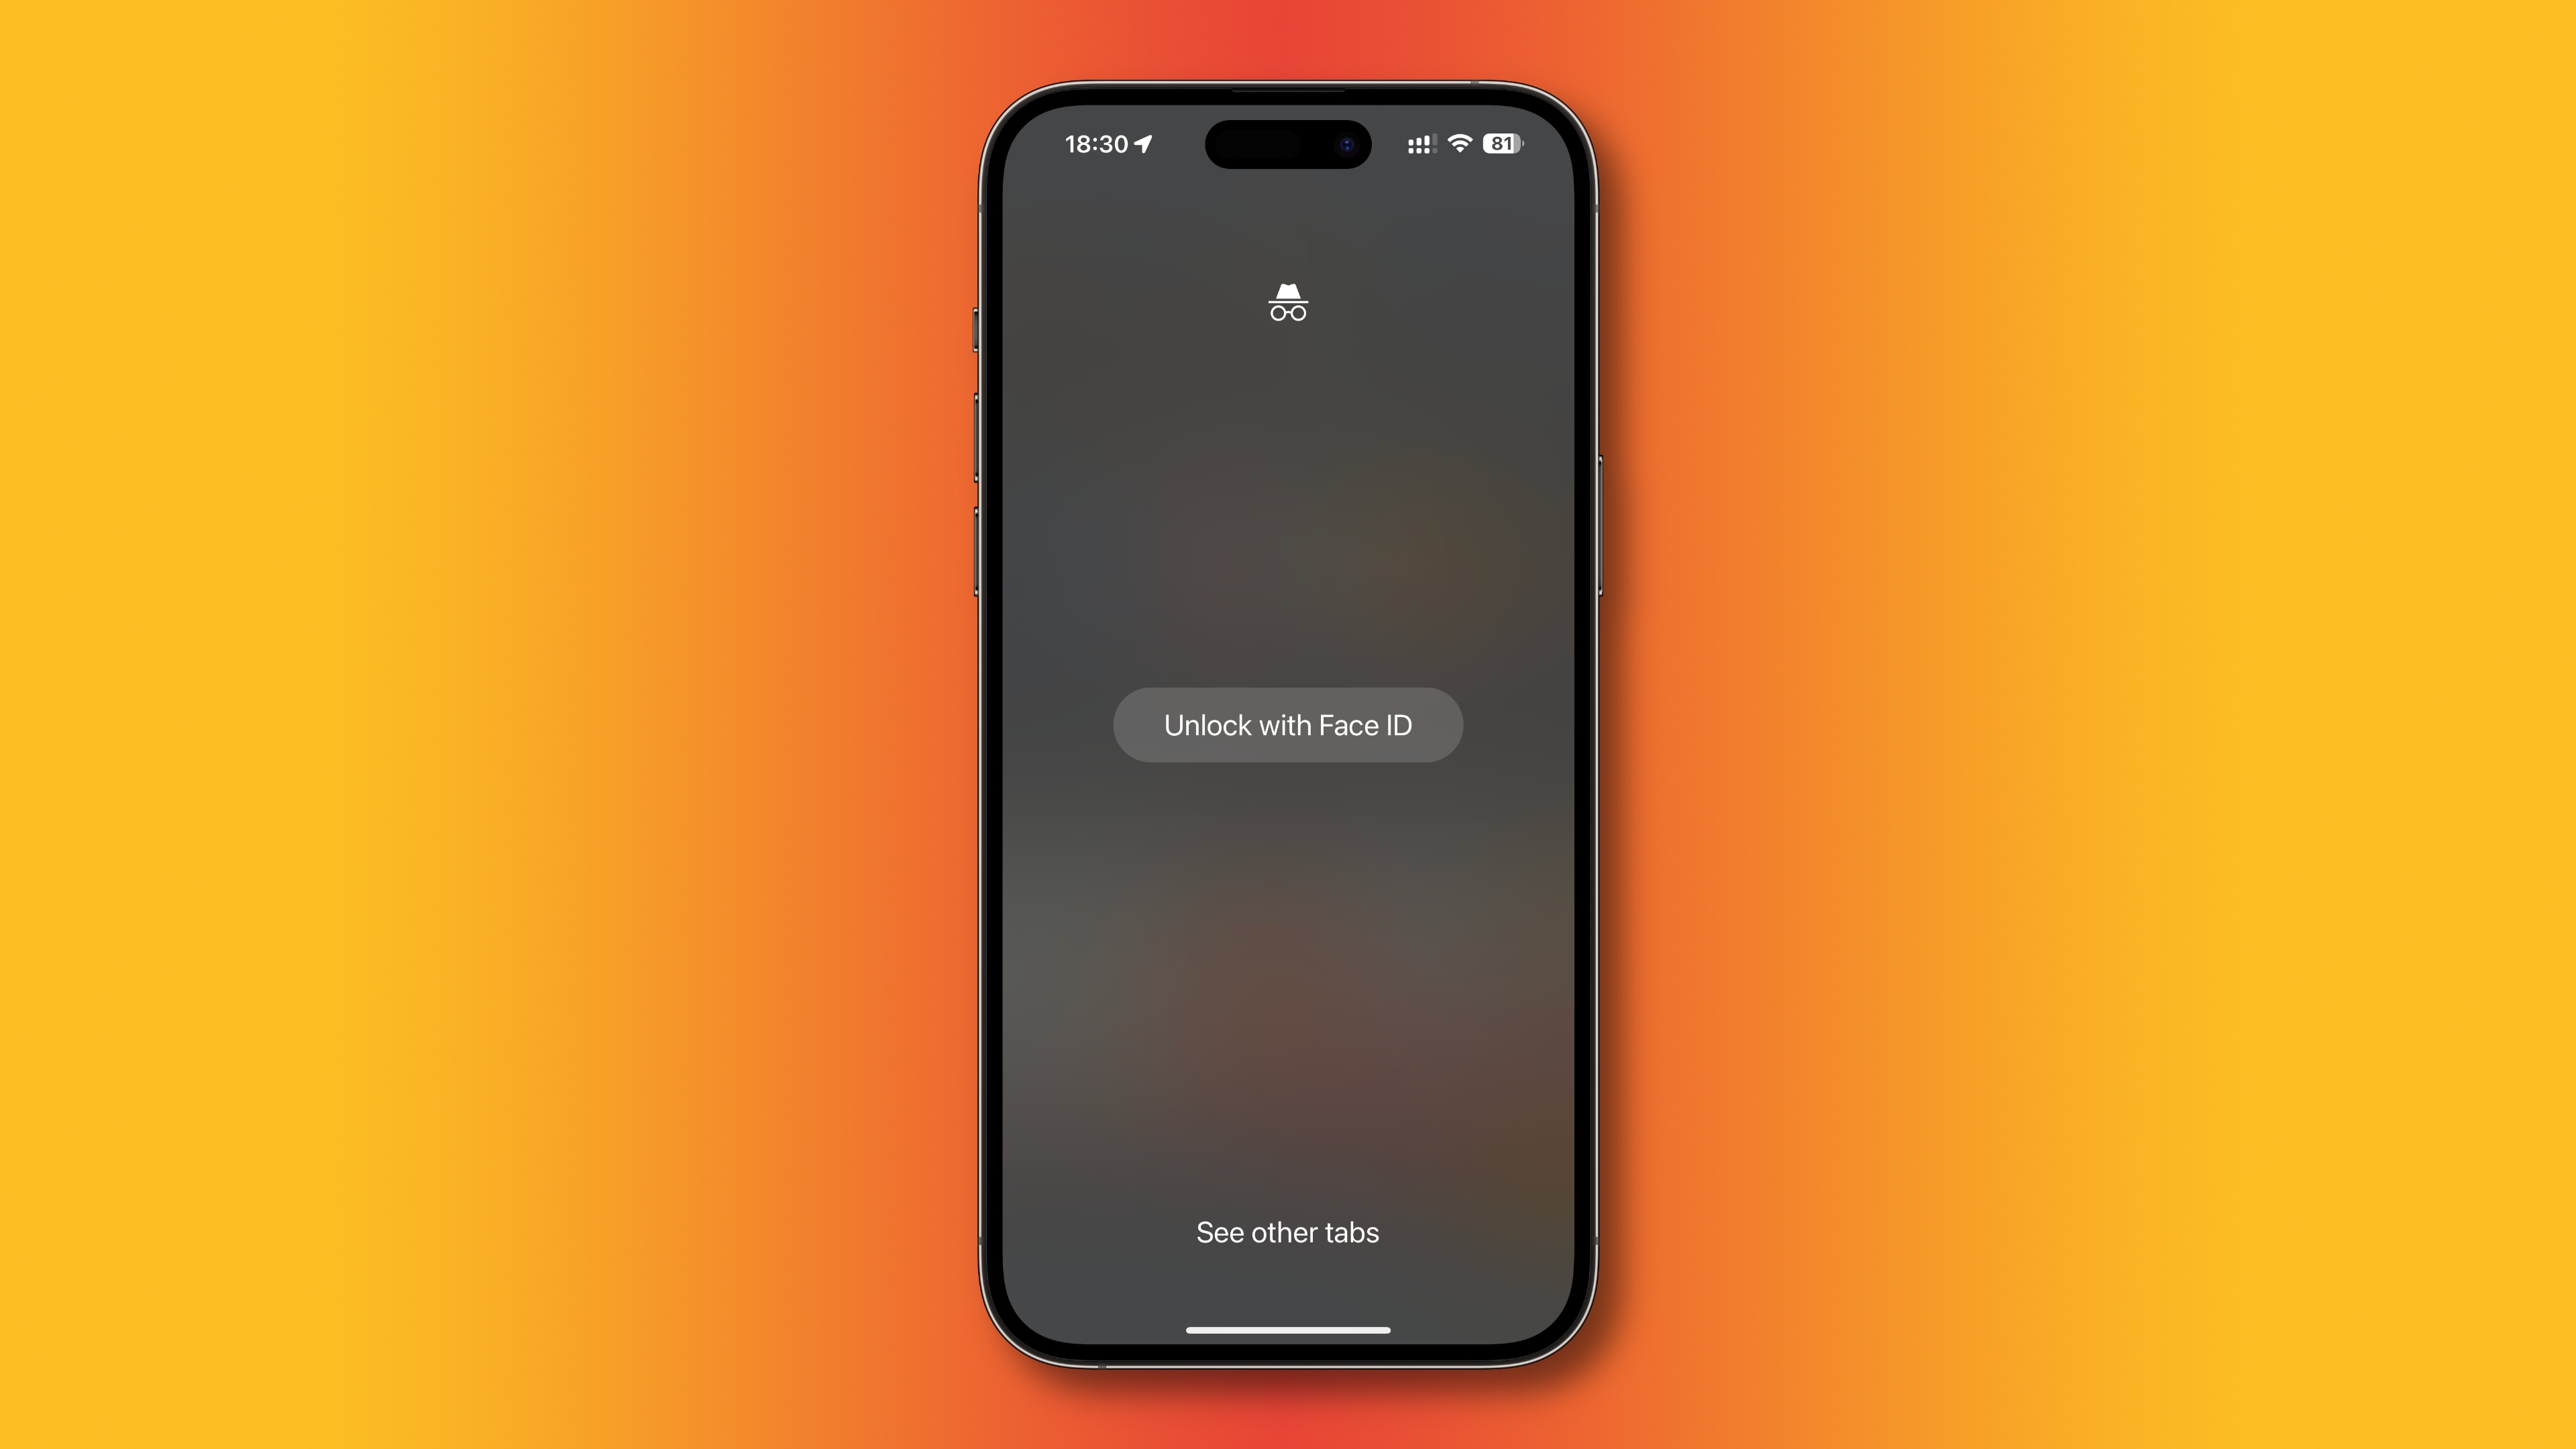 The Face ID prompt to access Incognito tabs in Chrome for iPhone